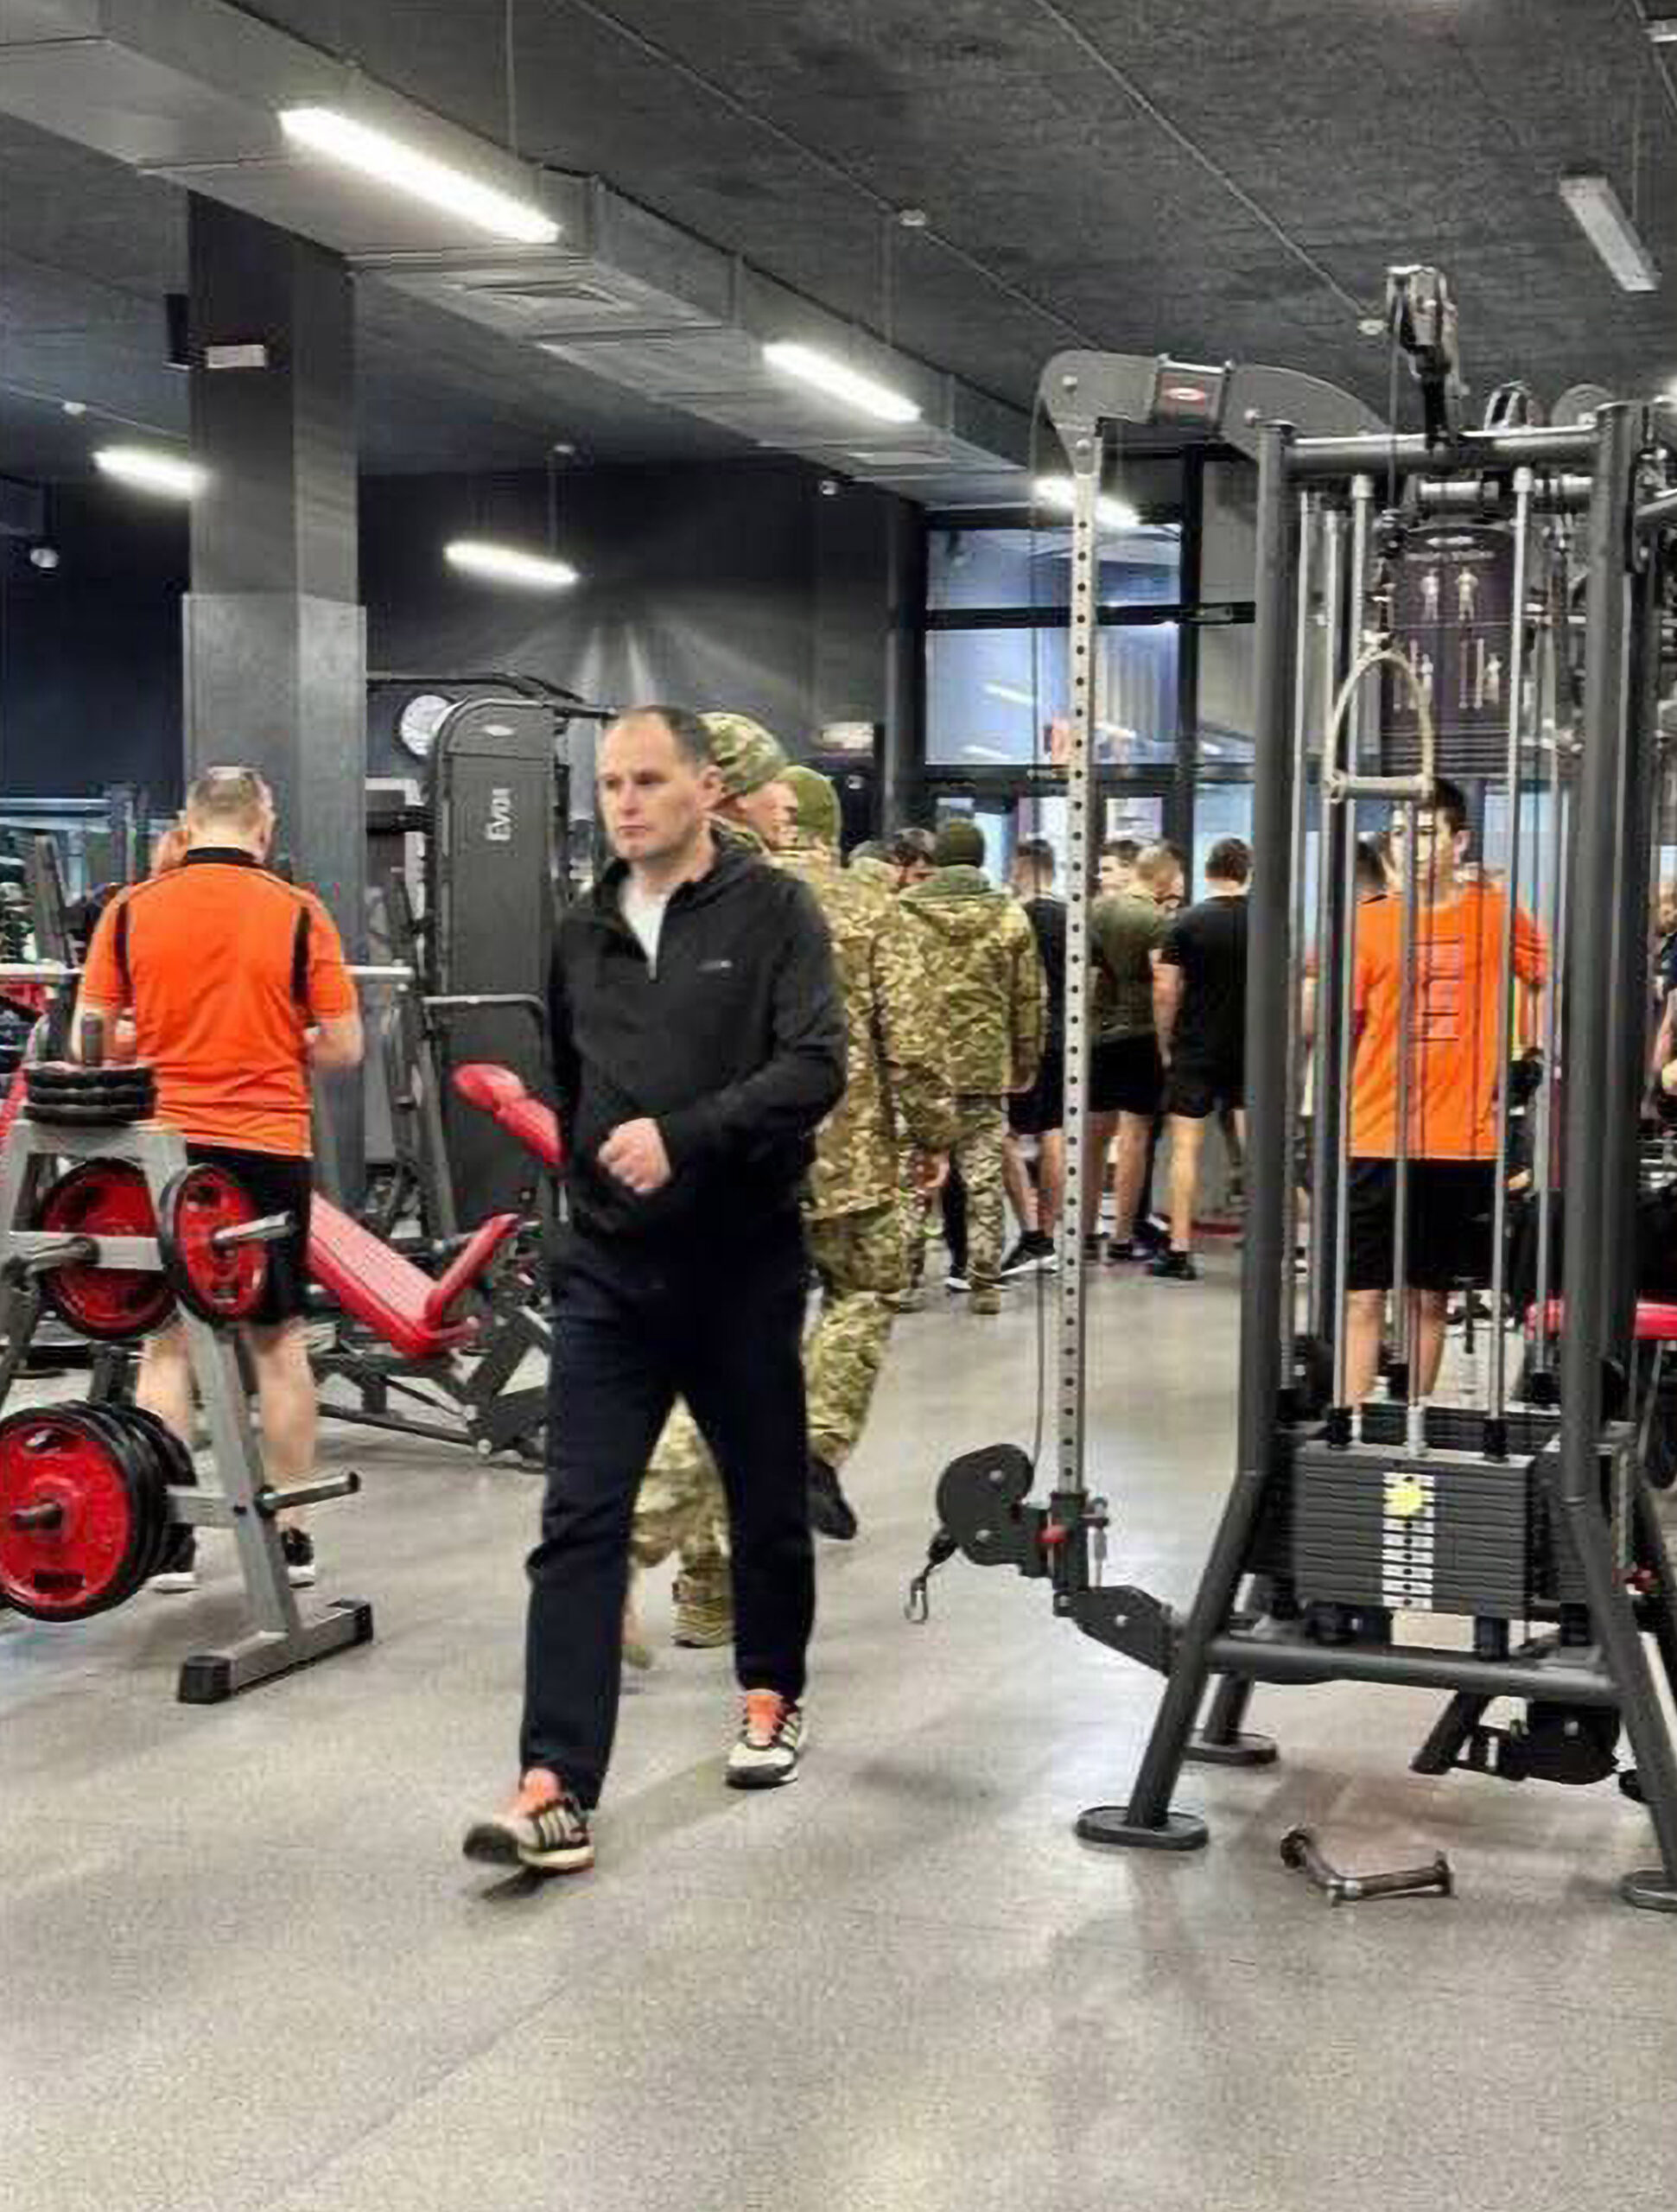 Read more about the article Moment Enlistment Officers Swarm Gym To Serve War Summons